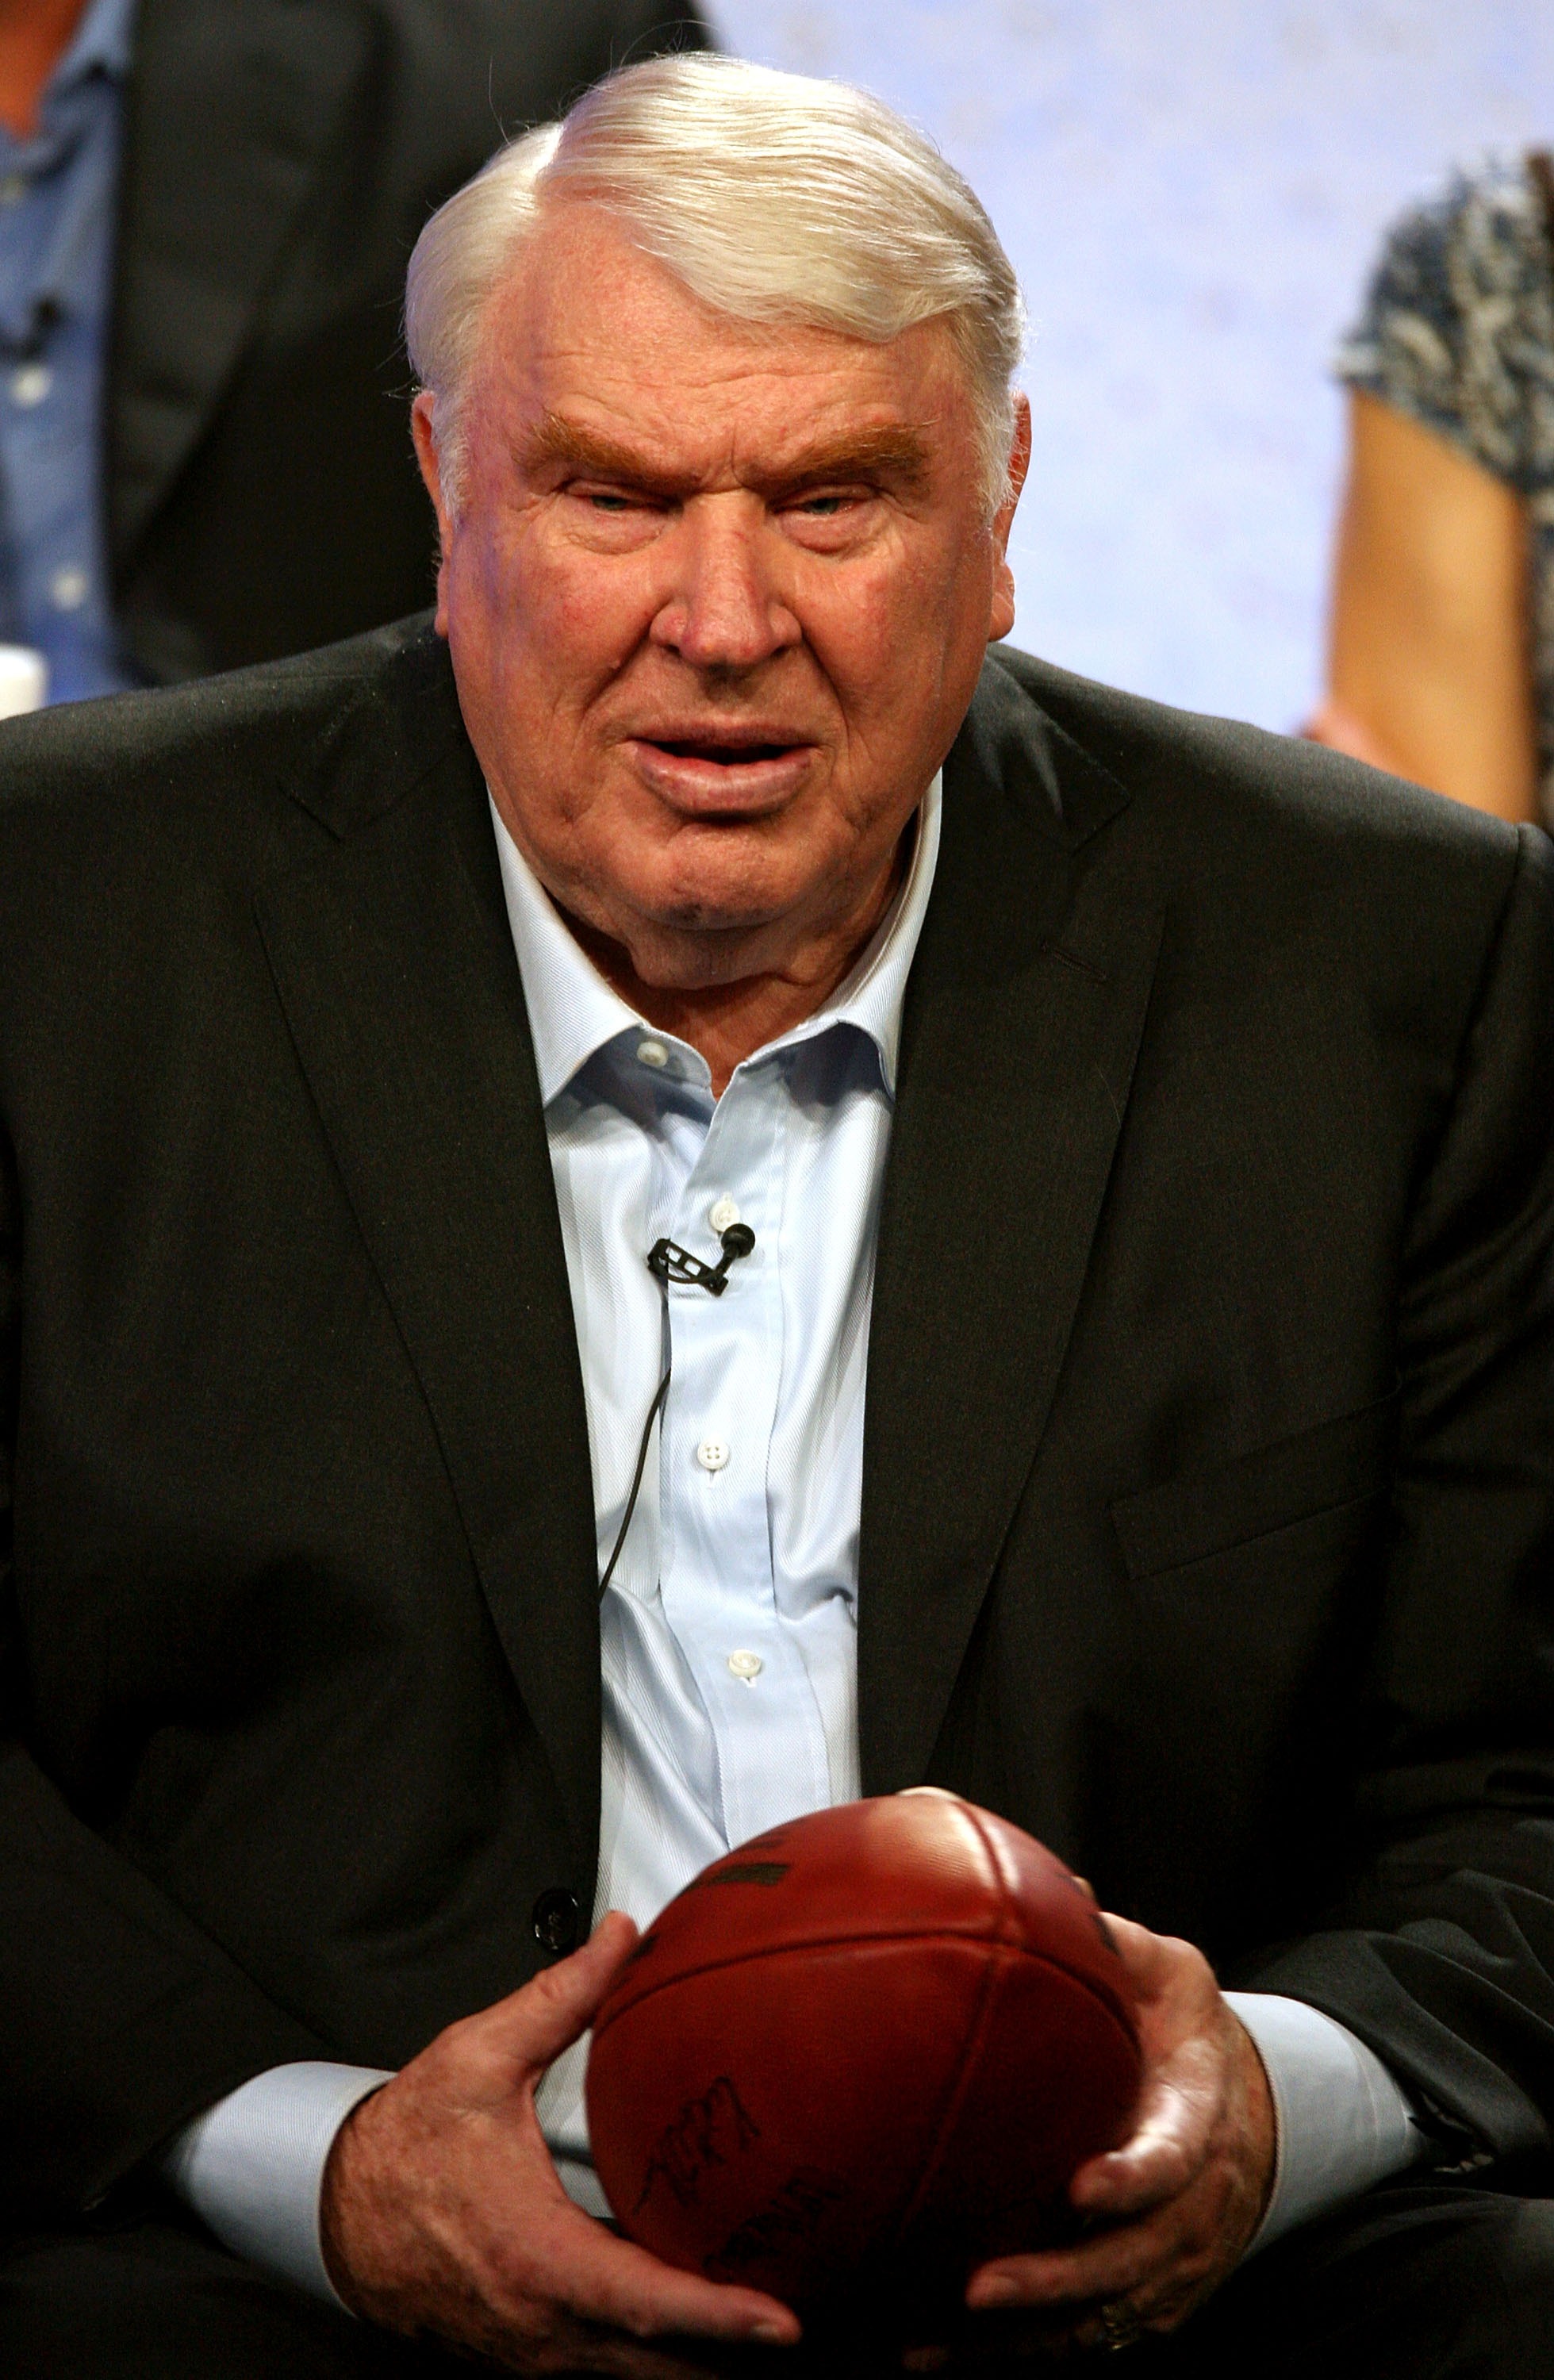 John Madden speaks for the TV show "NBC Sunday Night Football" during the NBC Univesal Cable portion of the Television Critics Association Press Tour at the Beverly Hilton Hotel on July 16, 2007, in Beverly Hills, California. | Source: Getty Images